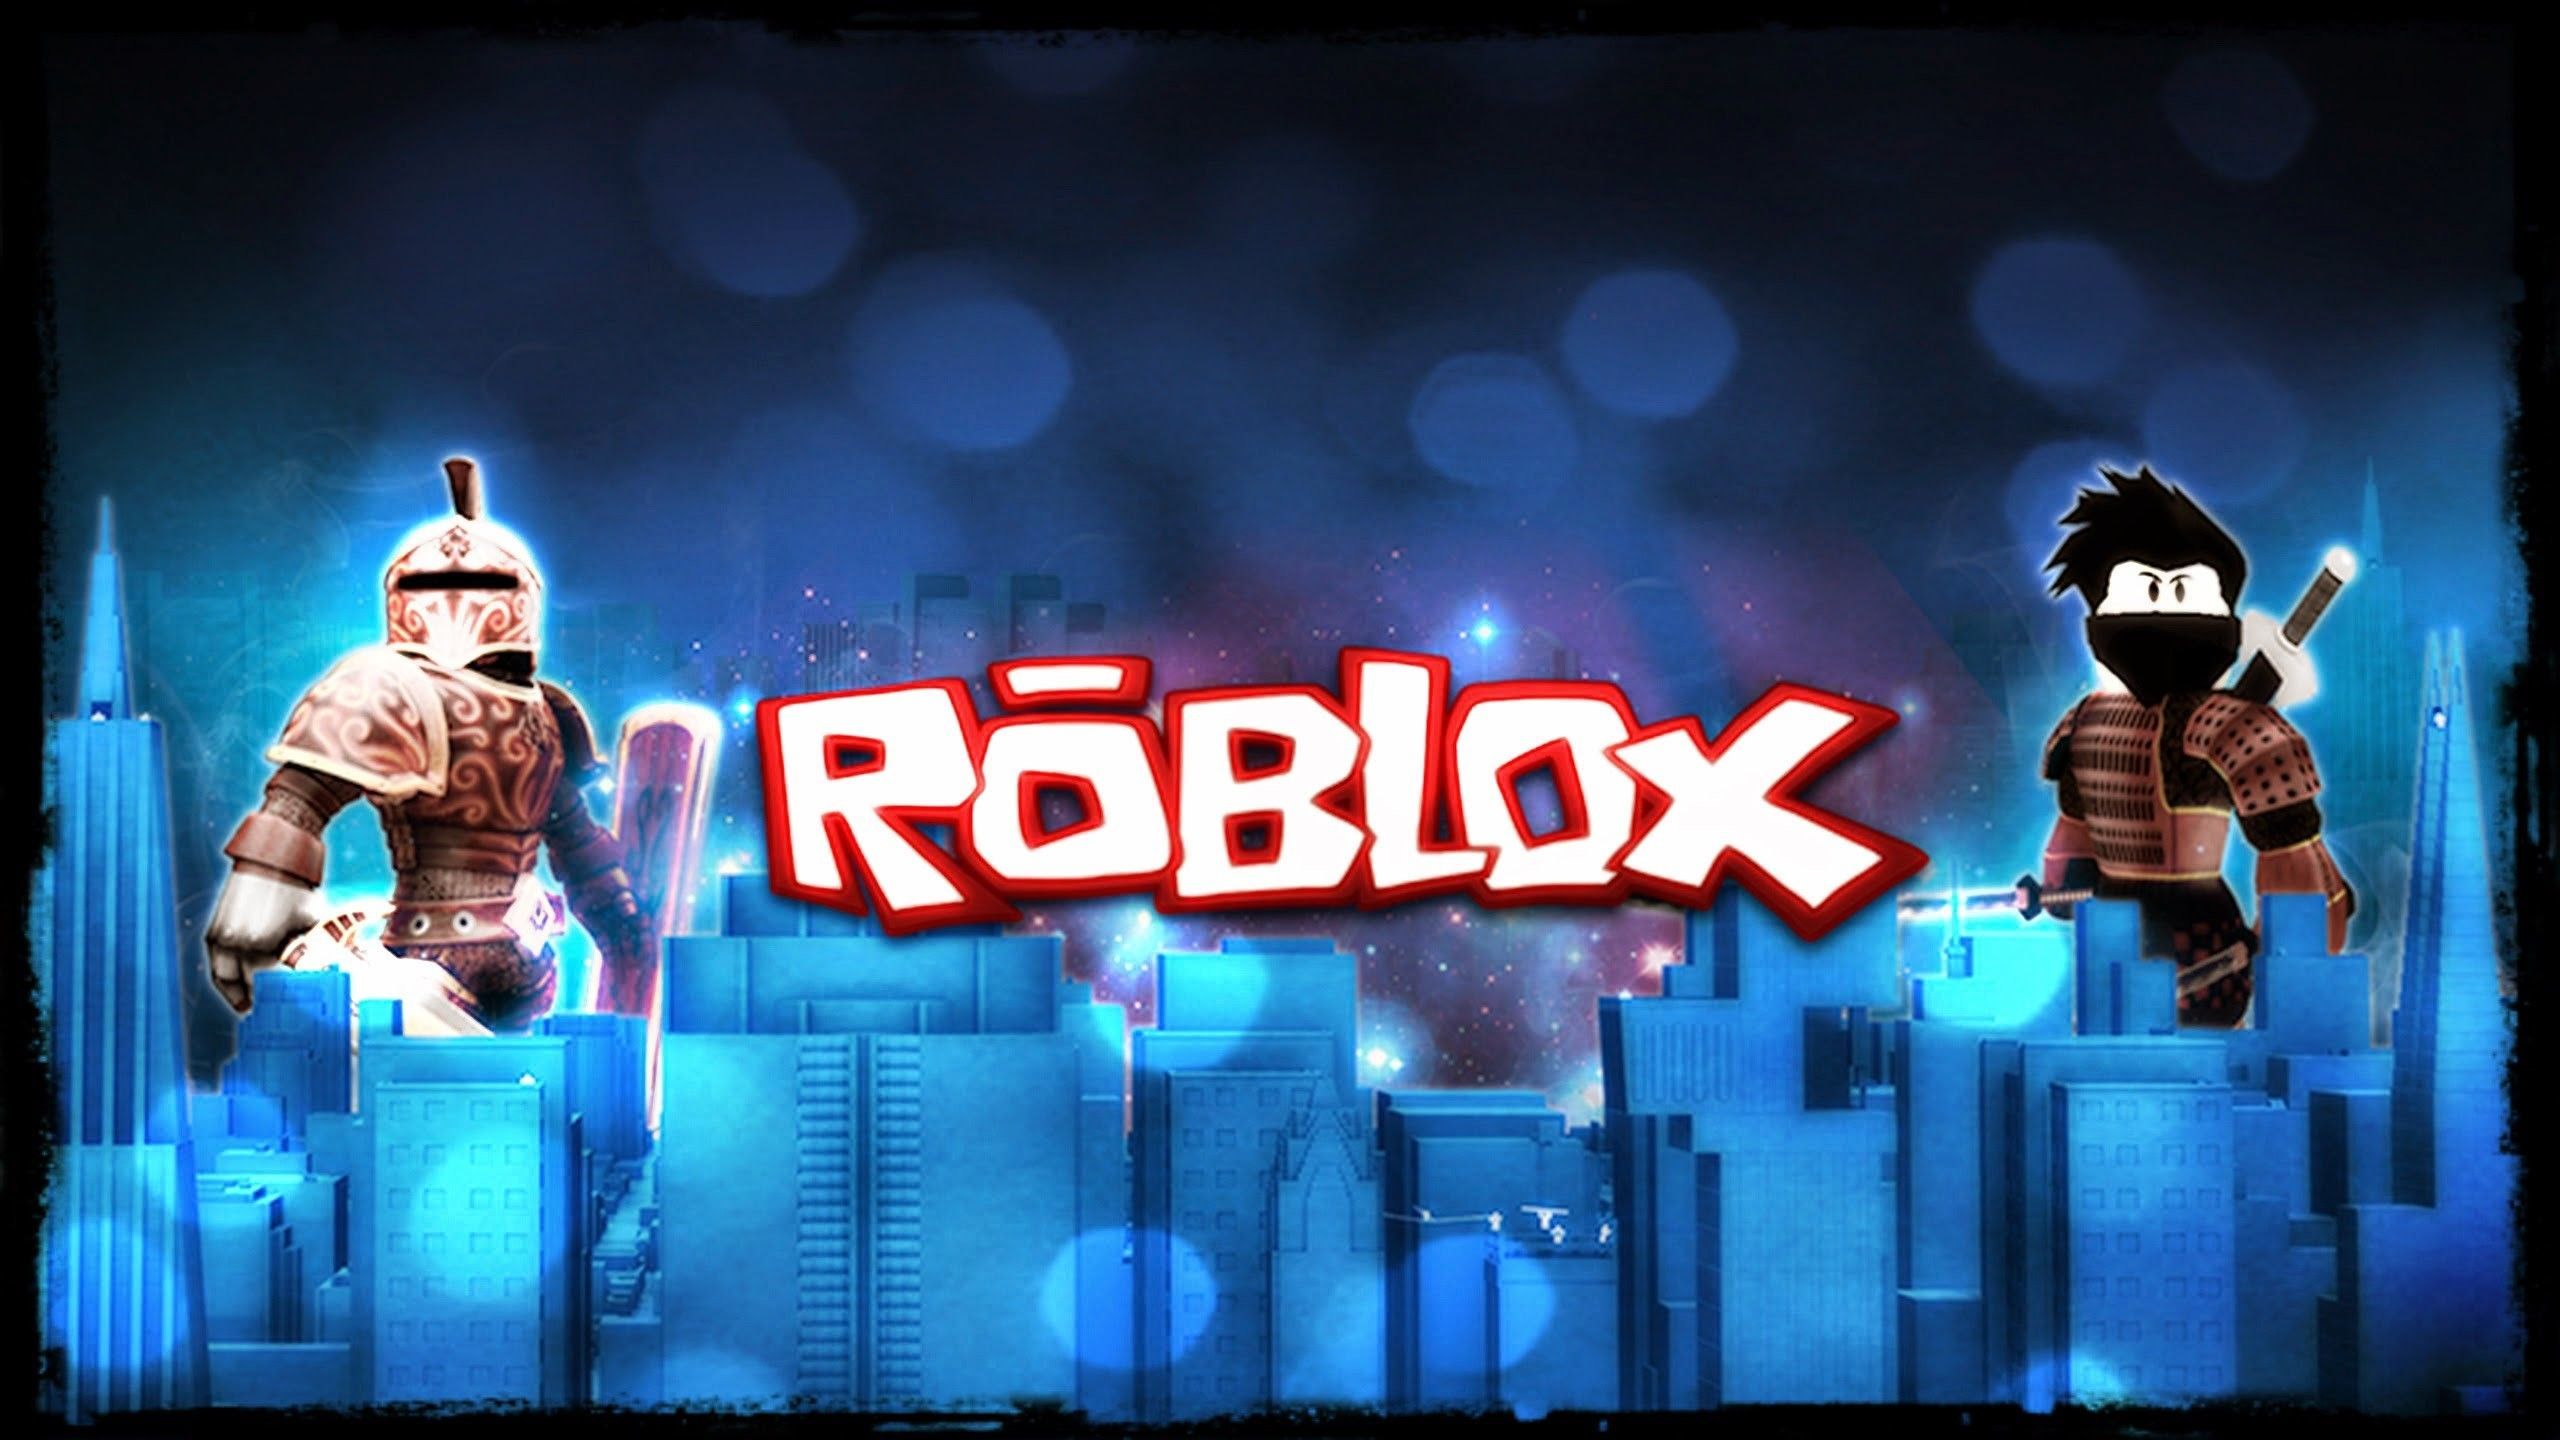 2560x1440 ... 9 best Roblox Posters and Wallpapers image